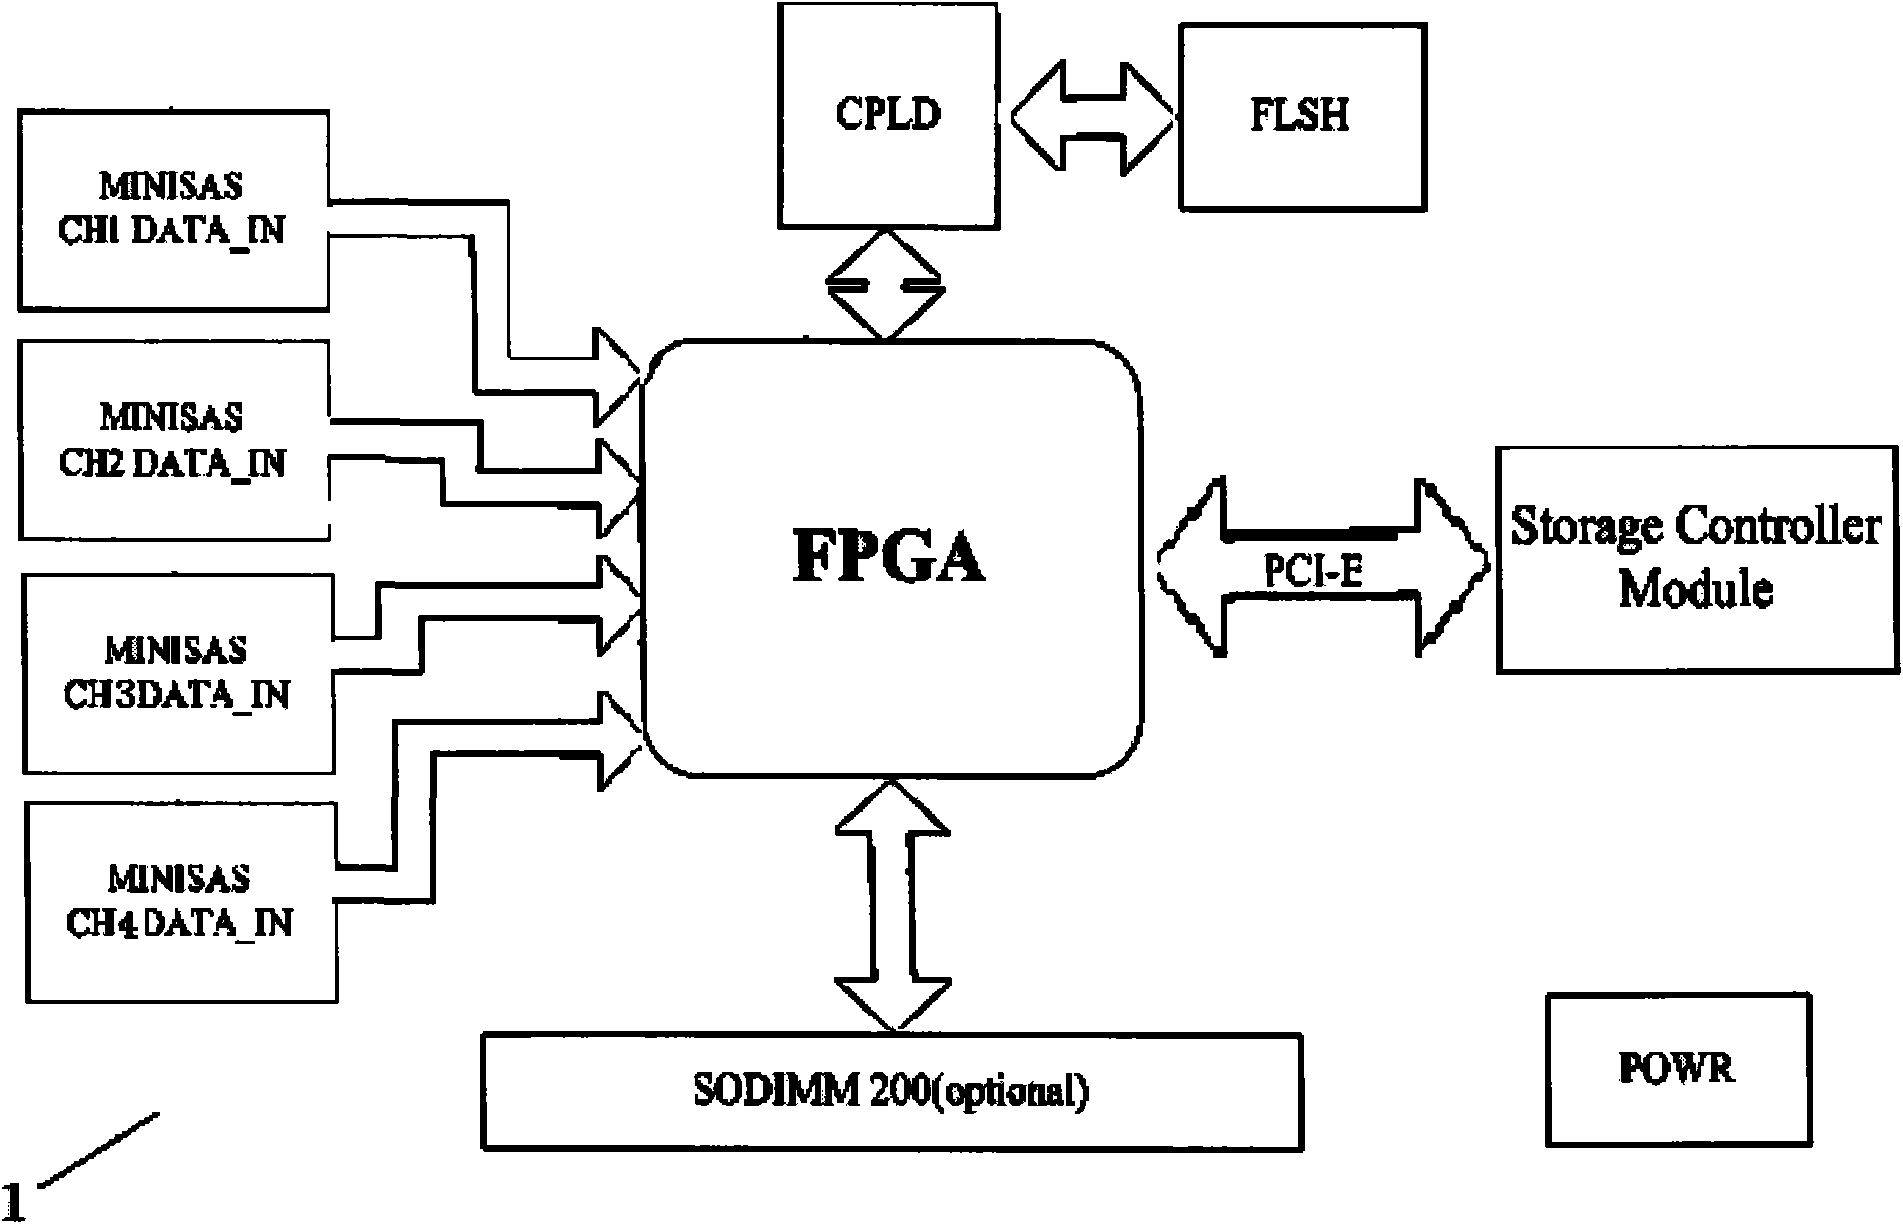 Apparatus for acquiring and storing high speed data in real time